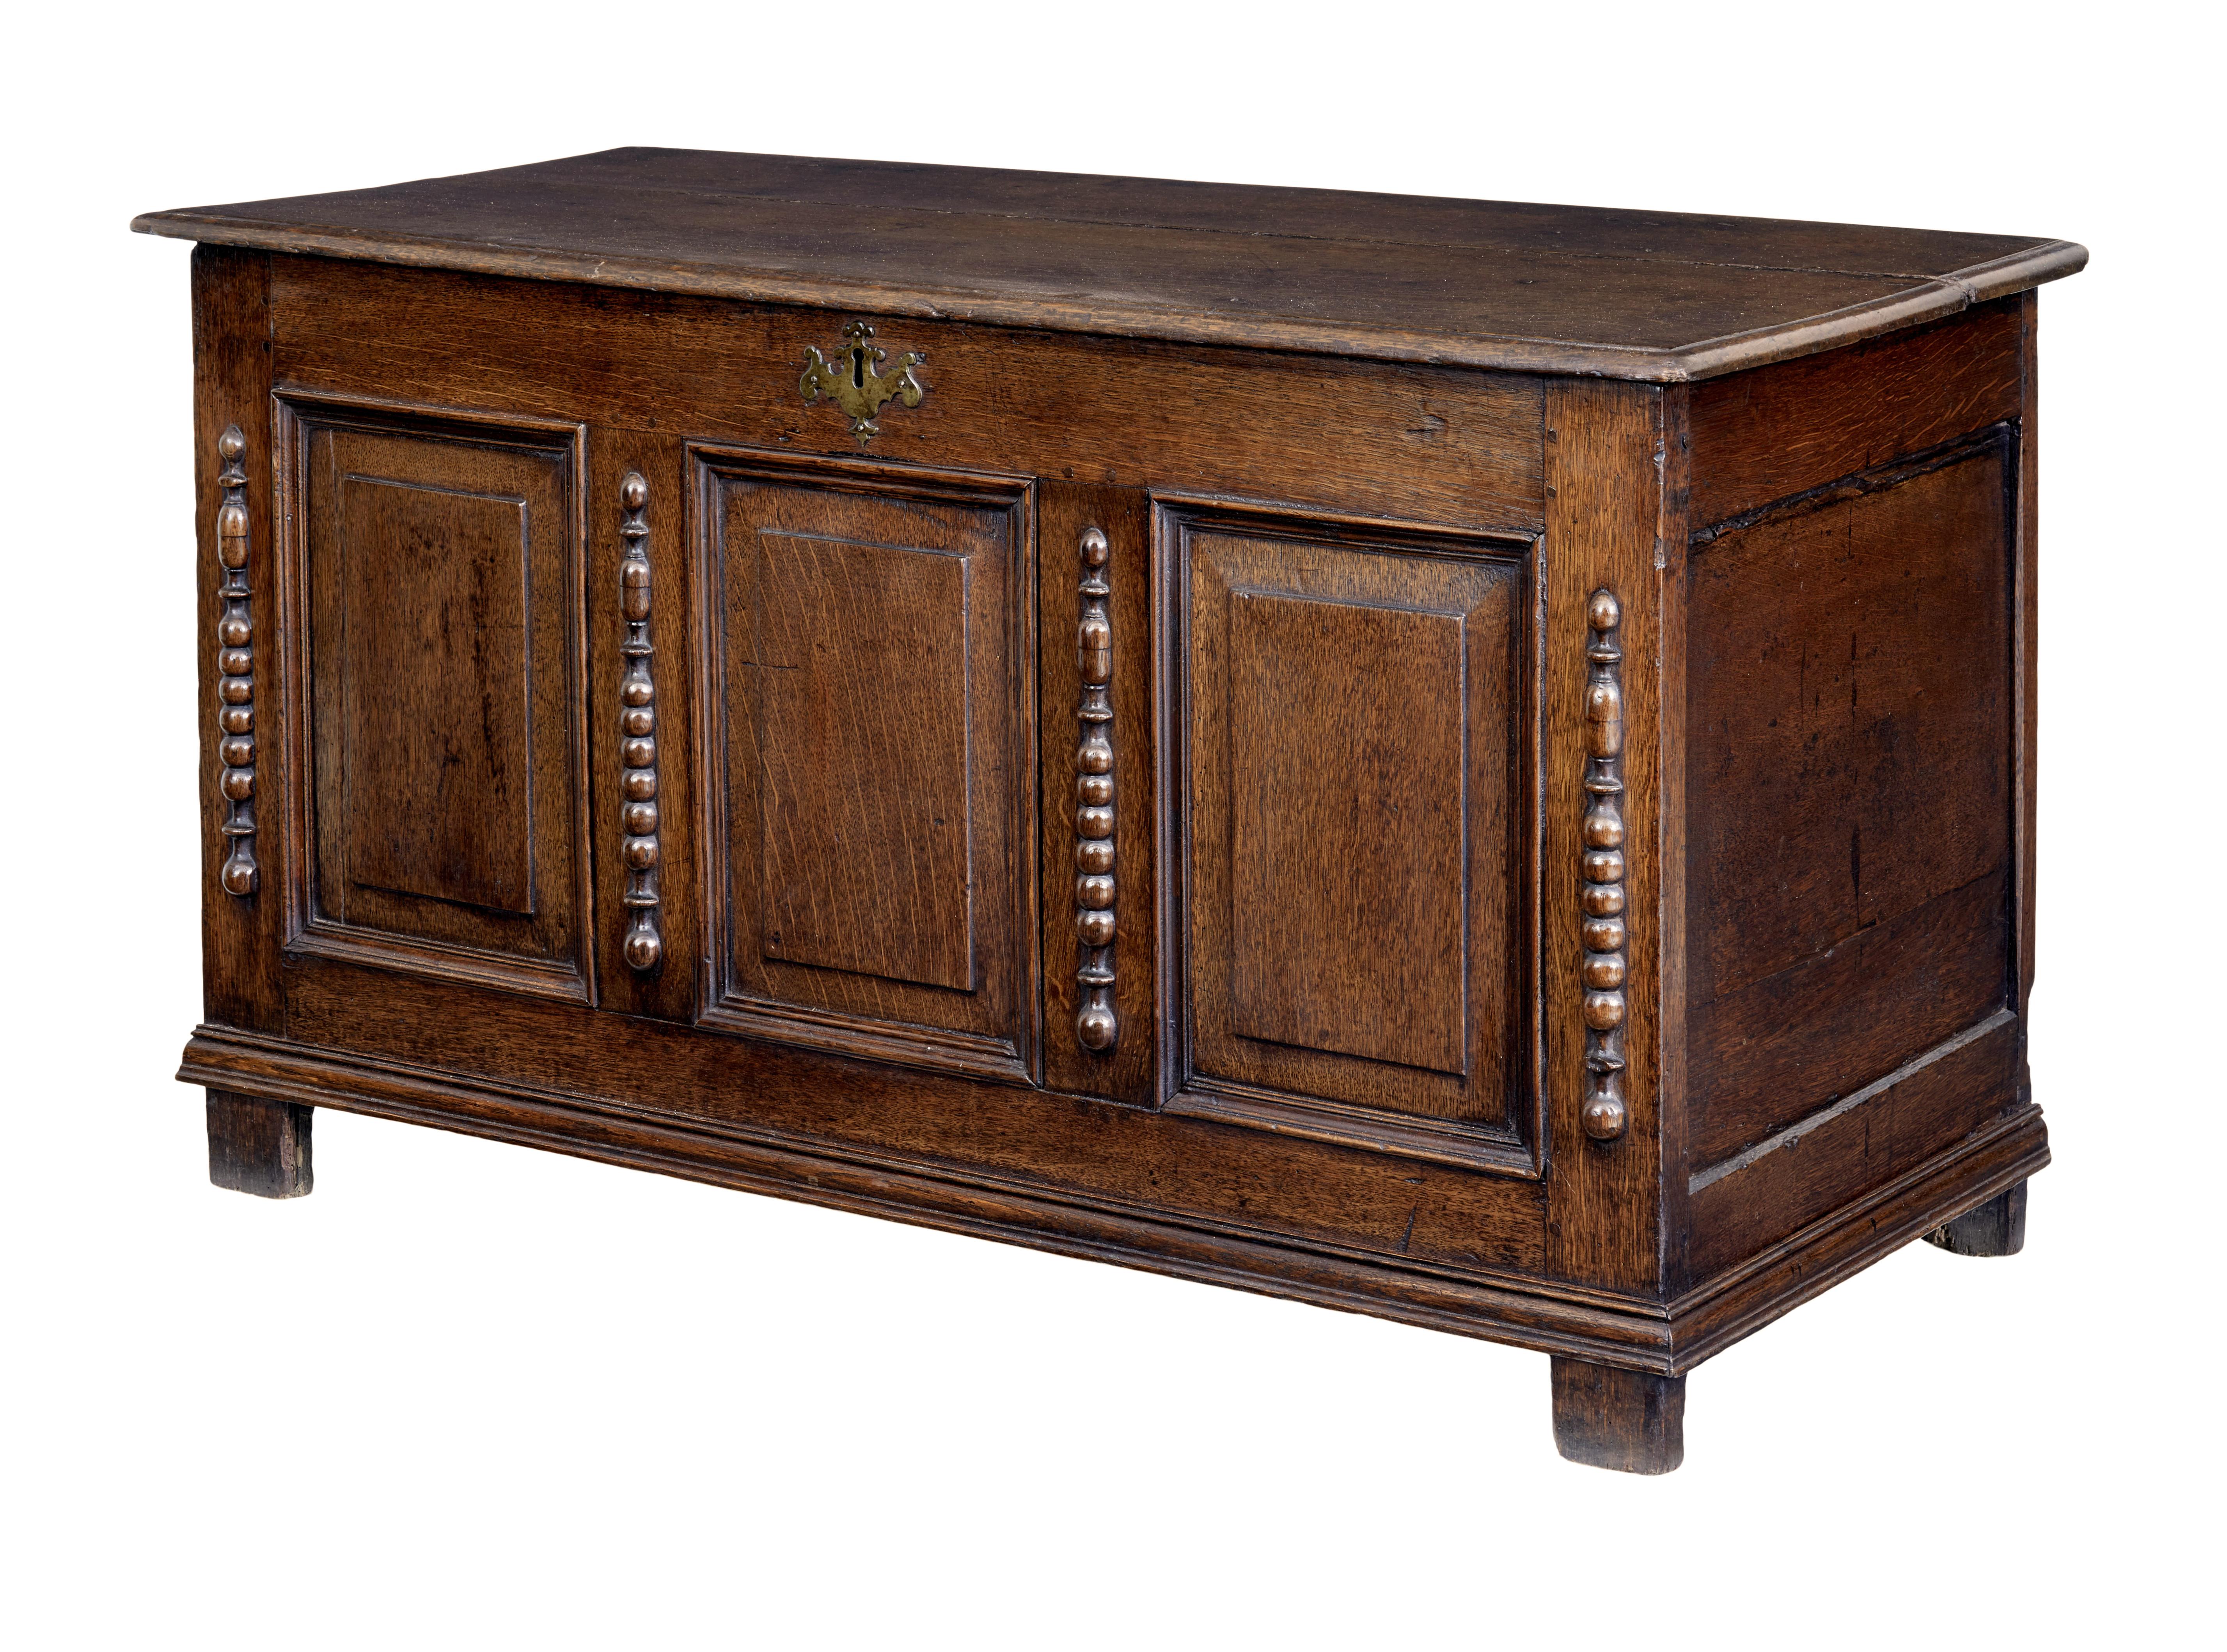 18th century small English oak coffer circa 1790.

3 fielded panels to the front each flanked by a beaded decoration. Good colour and patina, lid opens on original hinges to reveal storage space.

Expected age splits between planks to top and